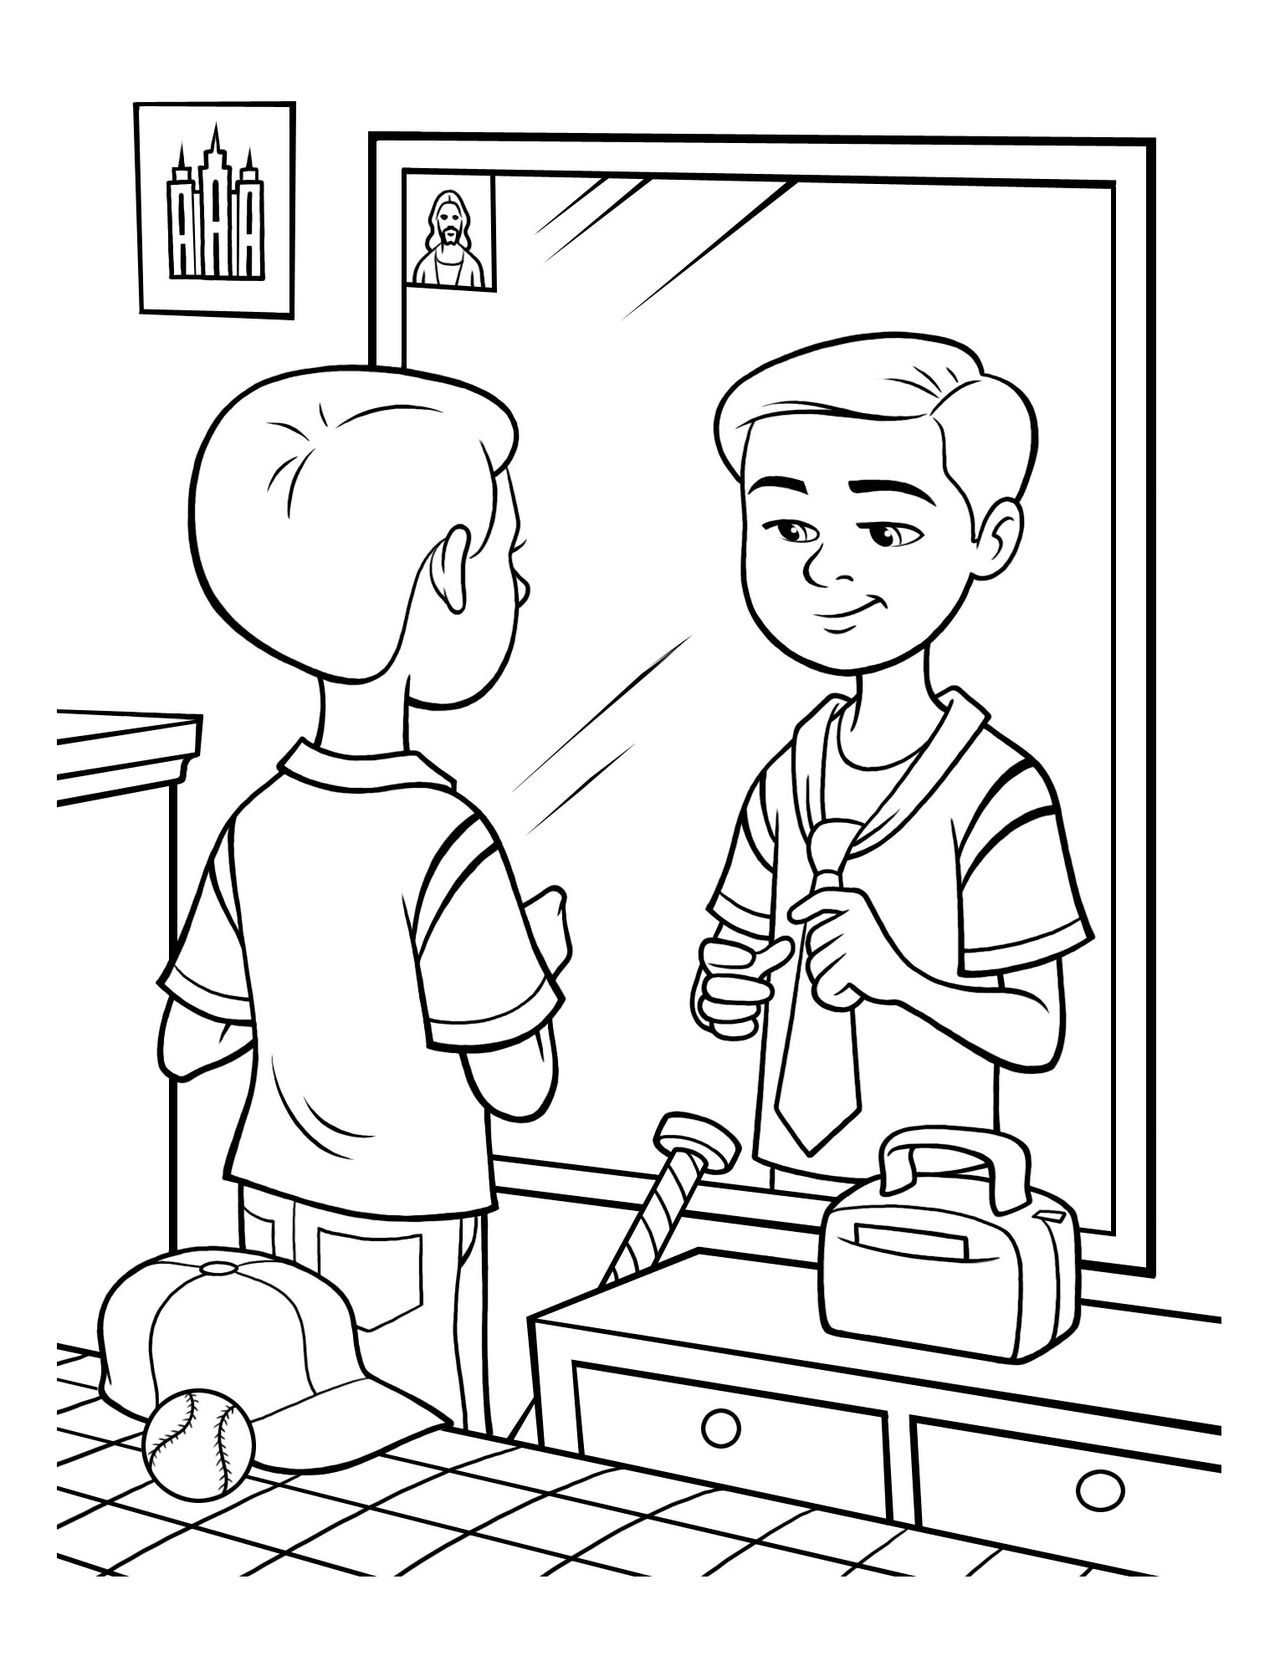 A boy stands in front of his mirror and practices tying a tie.